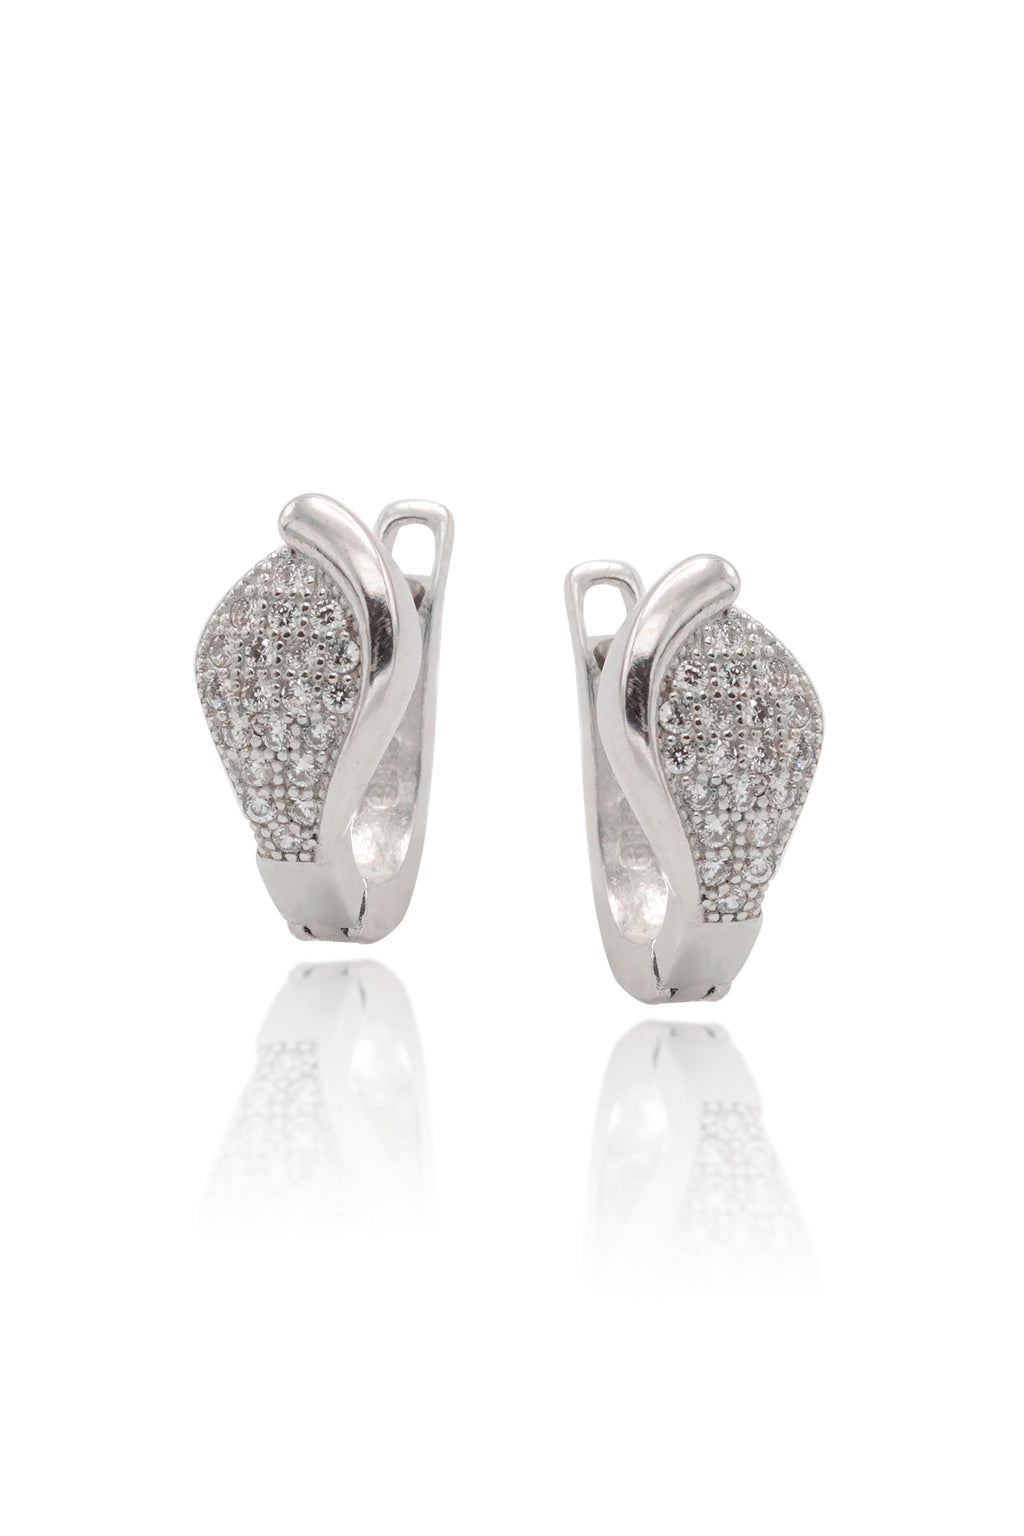 Oval Model Silver Earrings With Zircon (NG201019478)